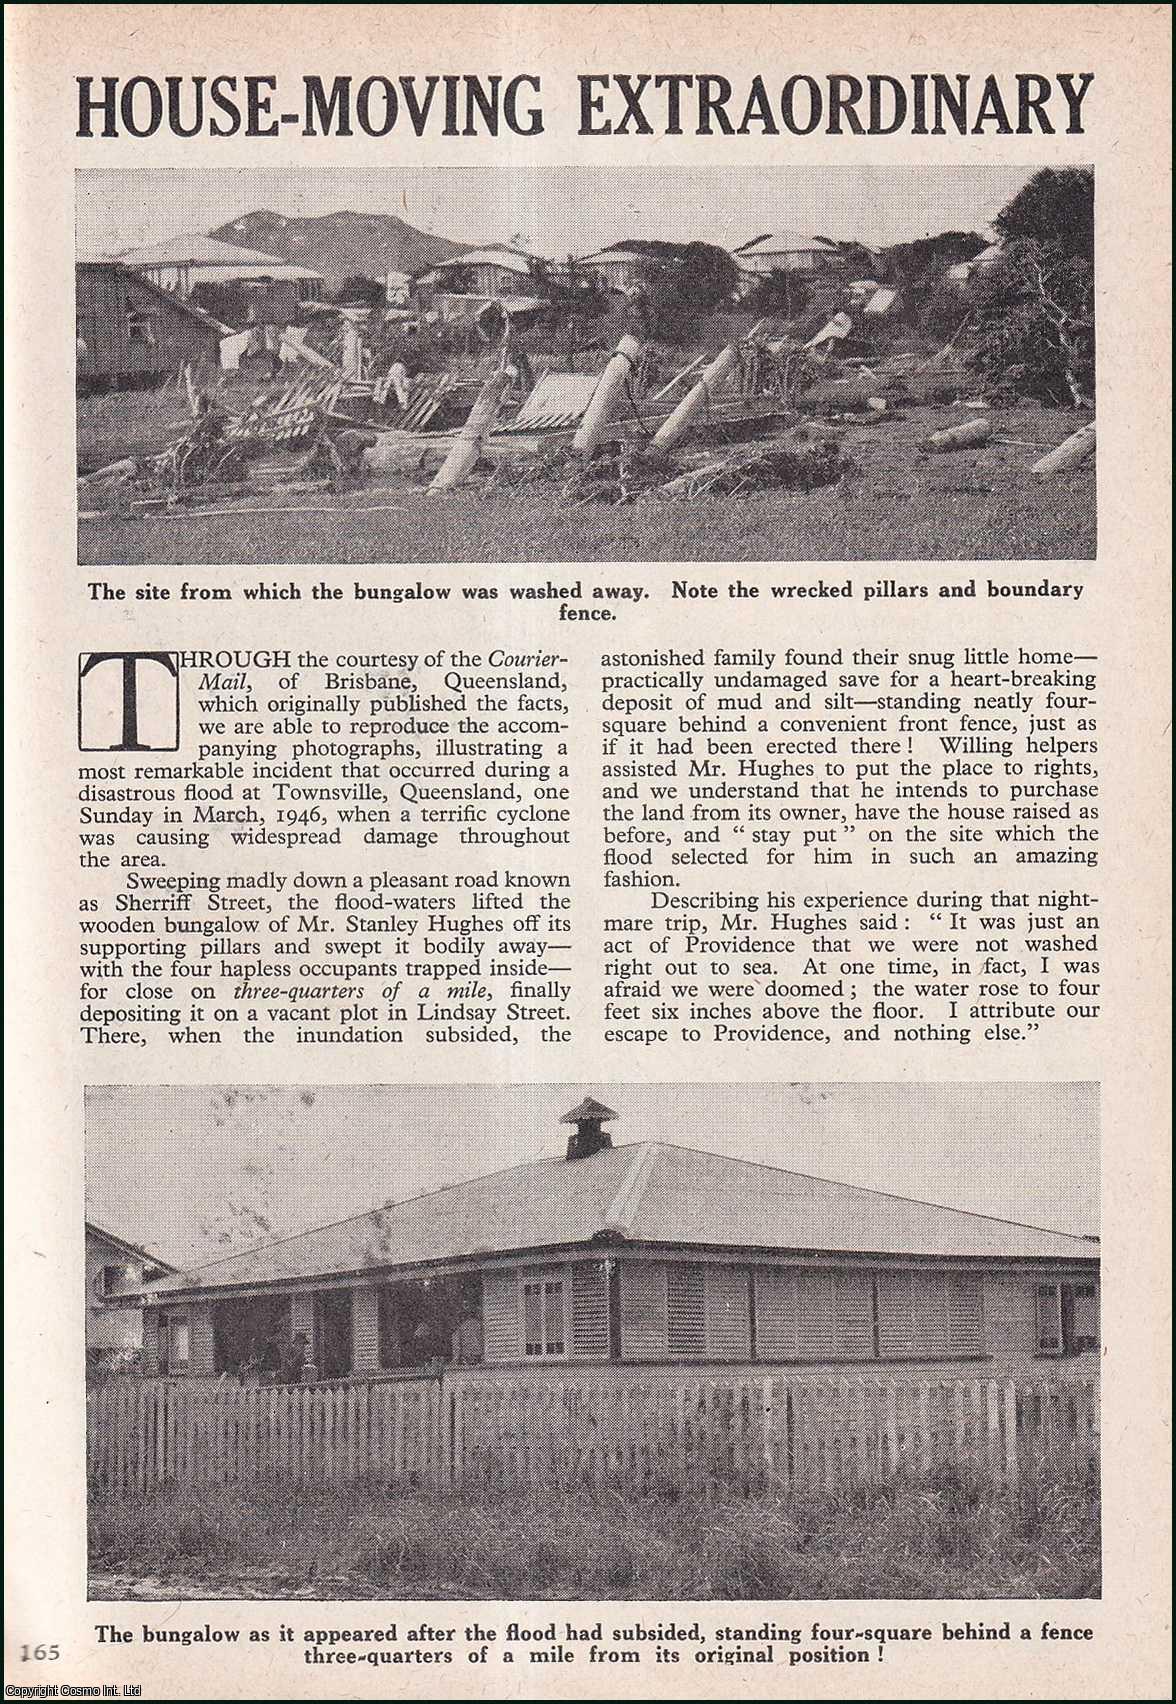 No Author Stated - House-Moving Extraordinary : Mr. Stanley Hughes bungalow at Sherriff Street, Townsville, Queensland was swept away during a disastrous flood, in March 1946 with him and four occupants still inside. An uncommon original article from the Wide World Magazine, 1947.